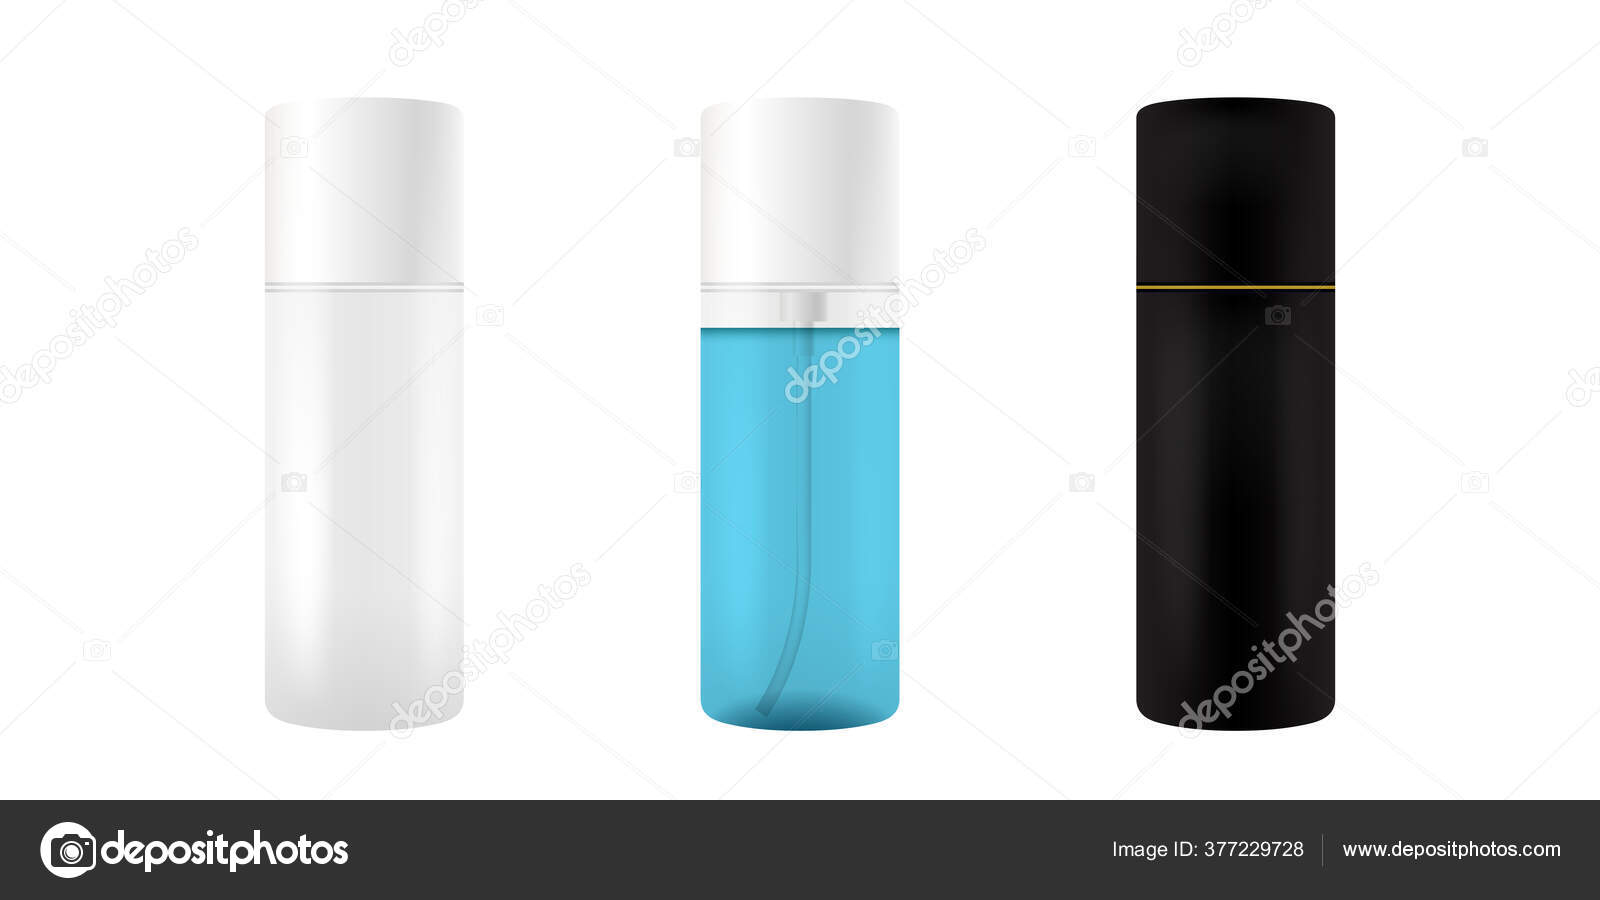 Download Plastic Cosmetic Bottle Isolated Black White And Transparent Mockup For Soup Shampoo Gel Spray Body Lotion Shampoo 3d Realistic Container Template Clear Medical Packaging Mockup Set Vector Image By C Anna Bo